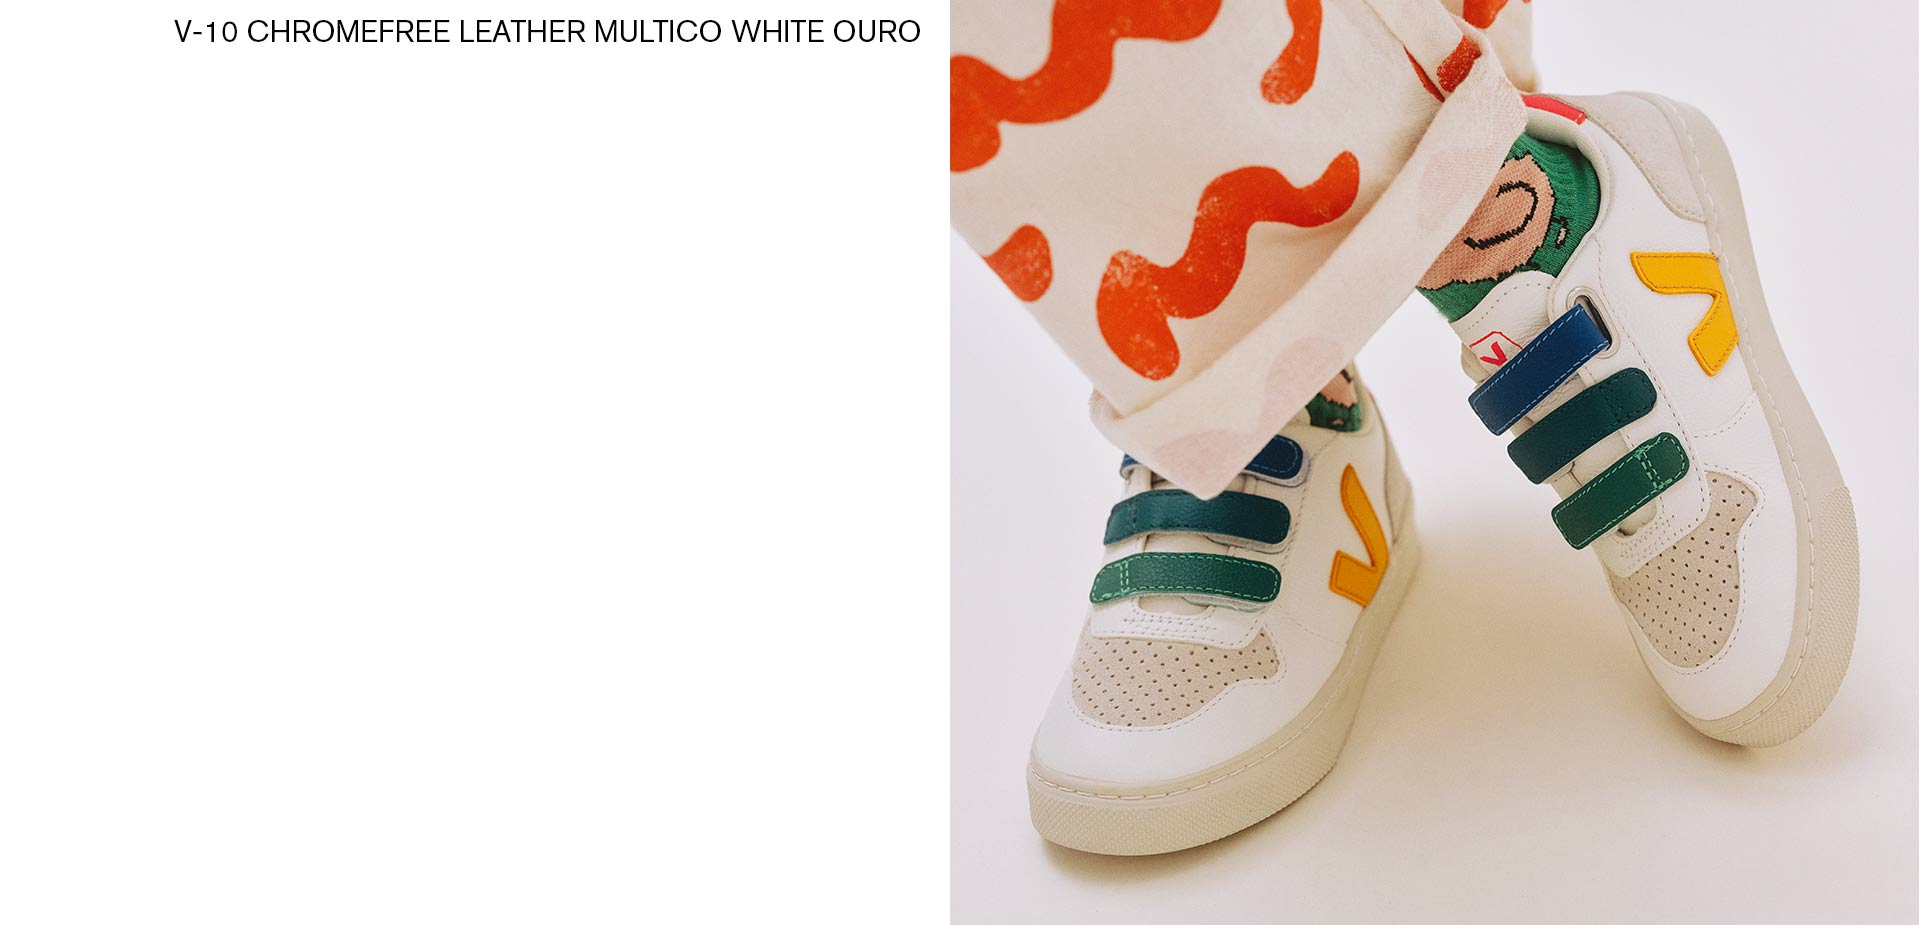 Focus on the feet of a child wearing V-10 chromefree multico white multico ouro shoes